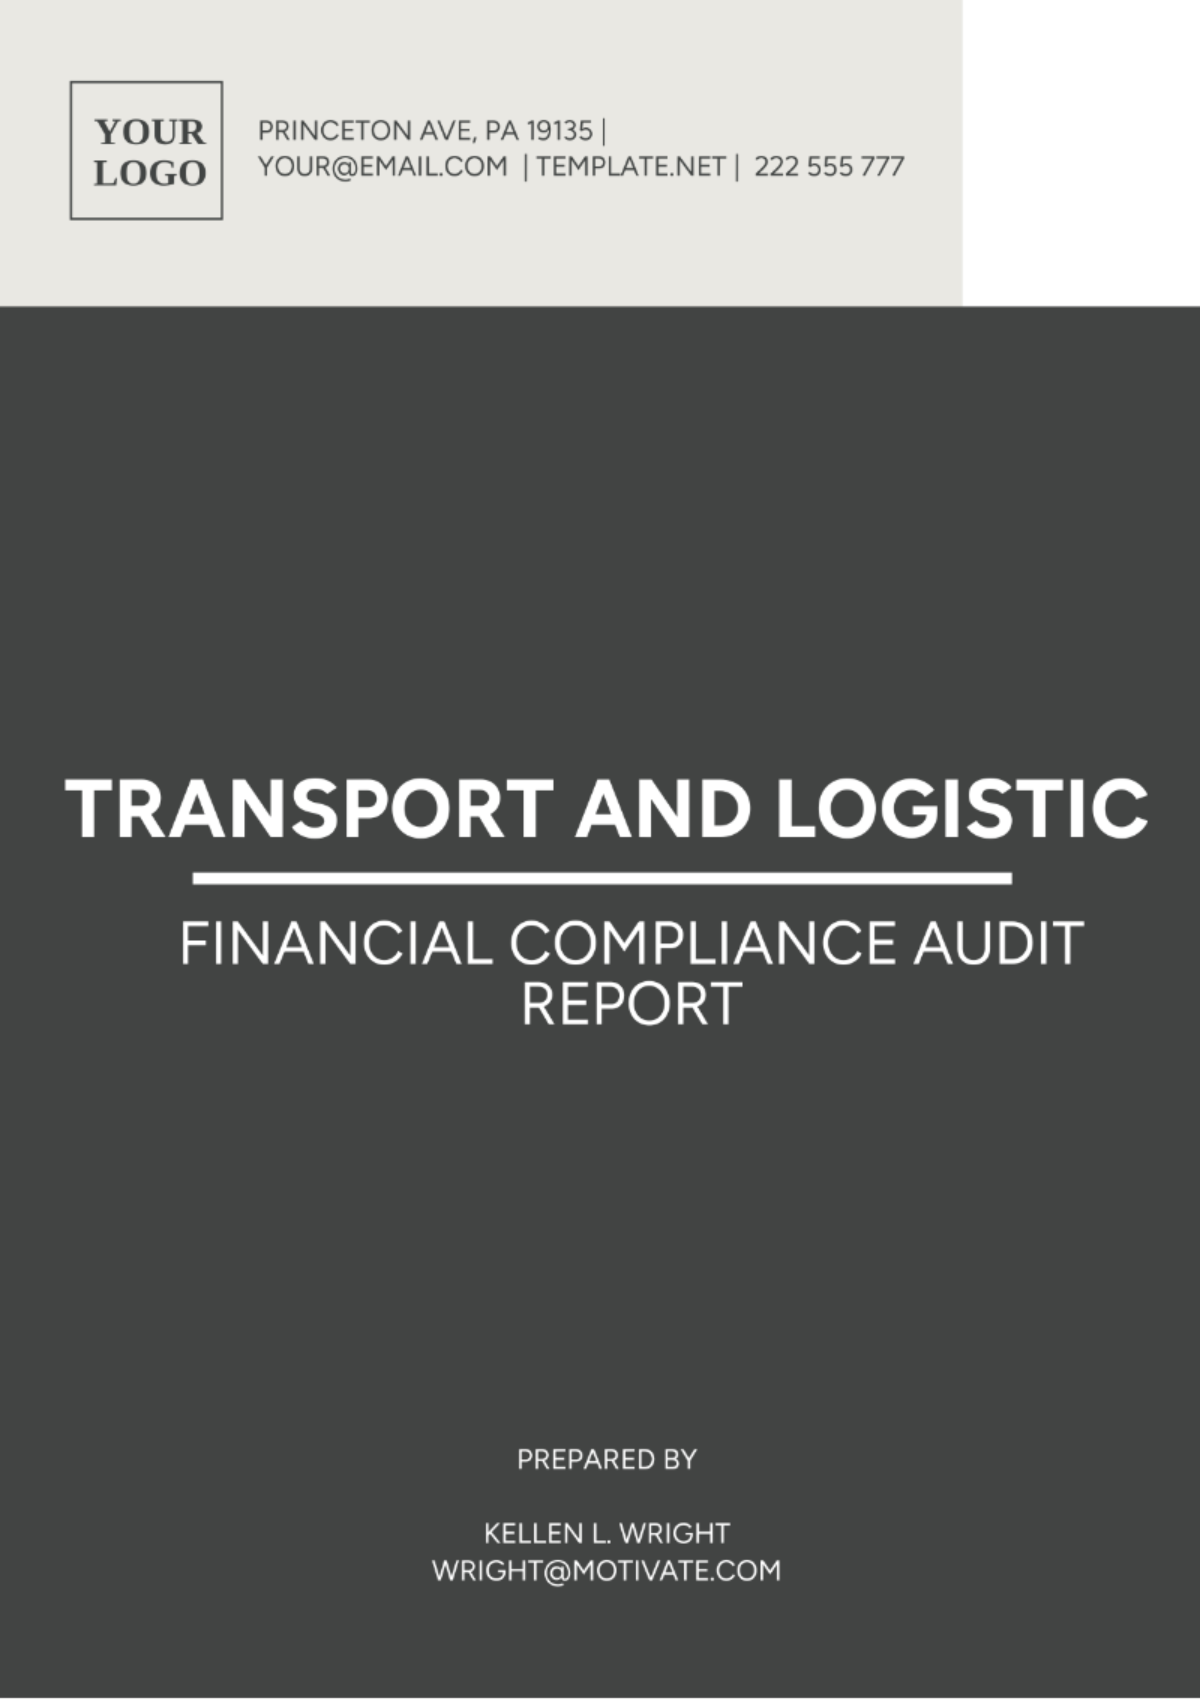 Free Transport And Logistics Financial Compliance Audit Report Template